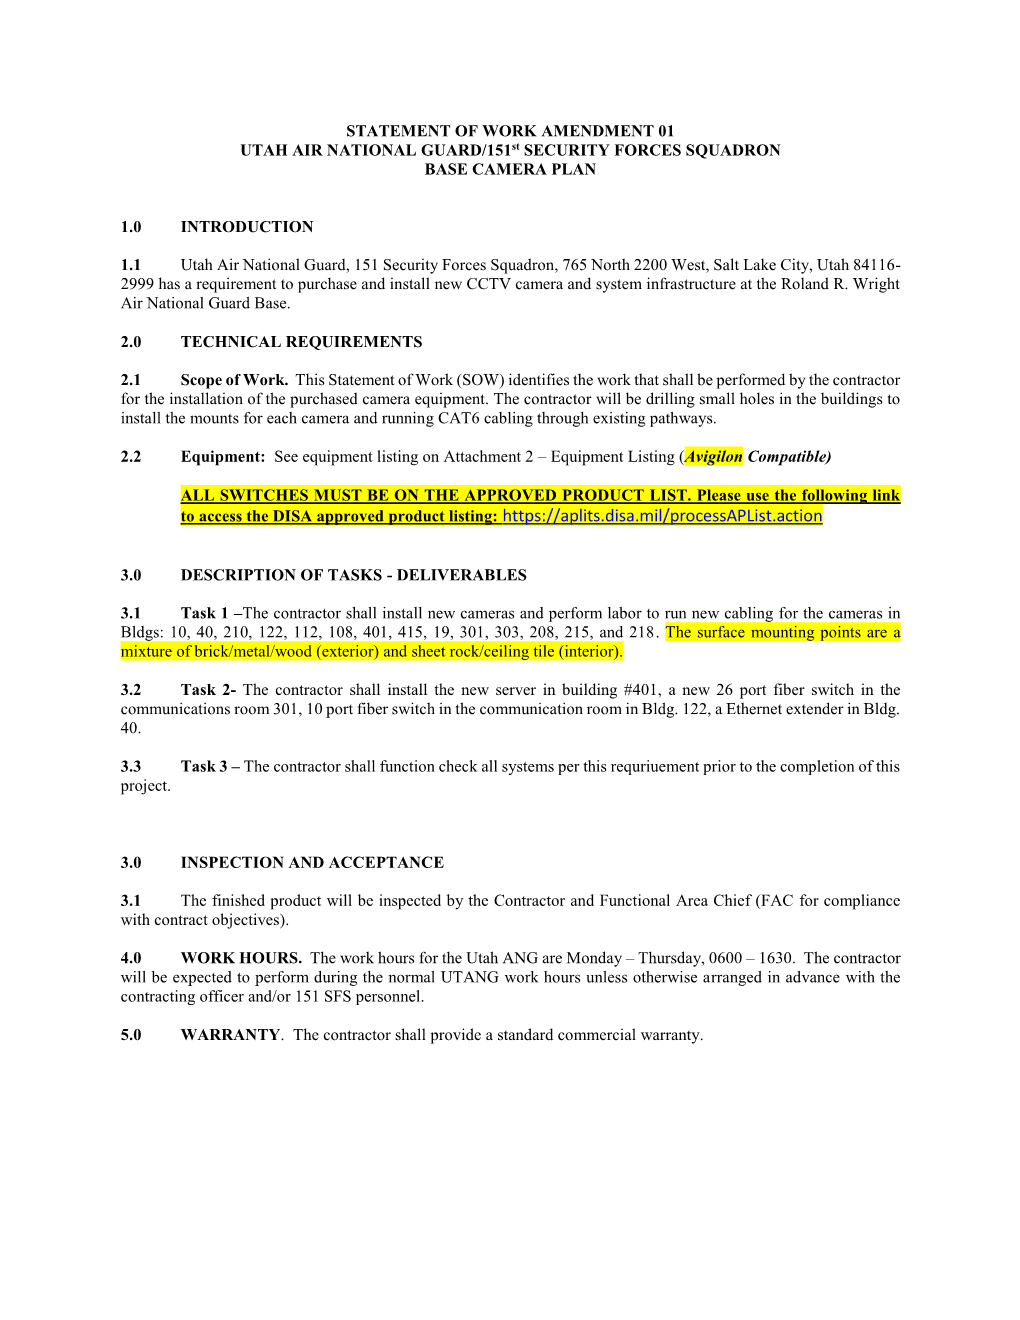 STATEMENT of WORK AMENDMENT 01 UTAH AIR NATIONAL GUARD/151St SECURITY FORCES SQUADRON BASE CAMERA PLAN